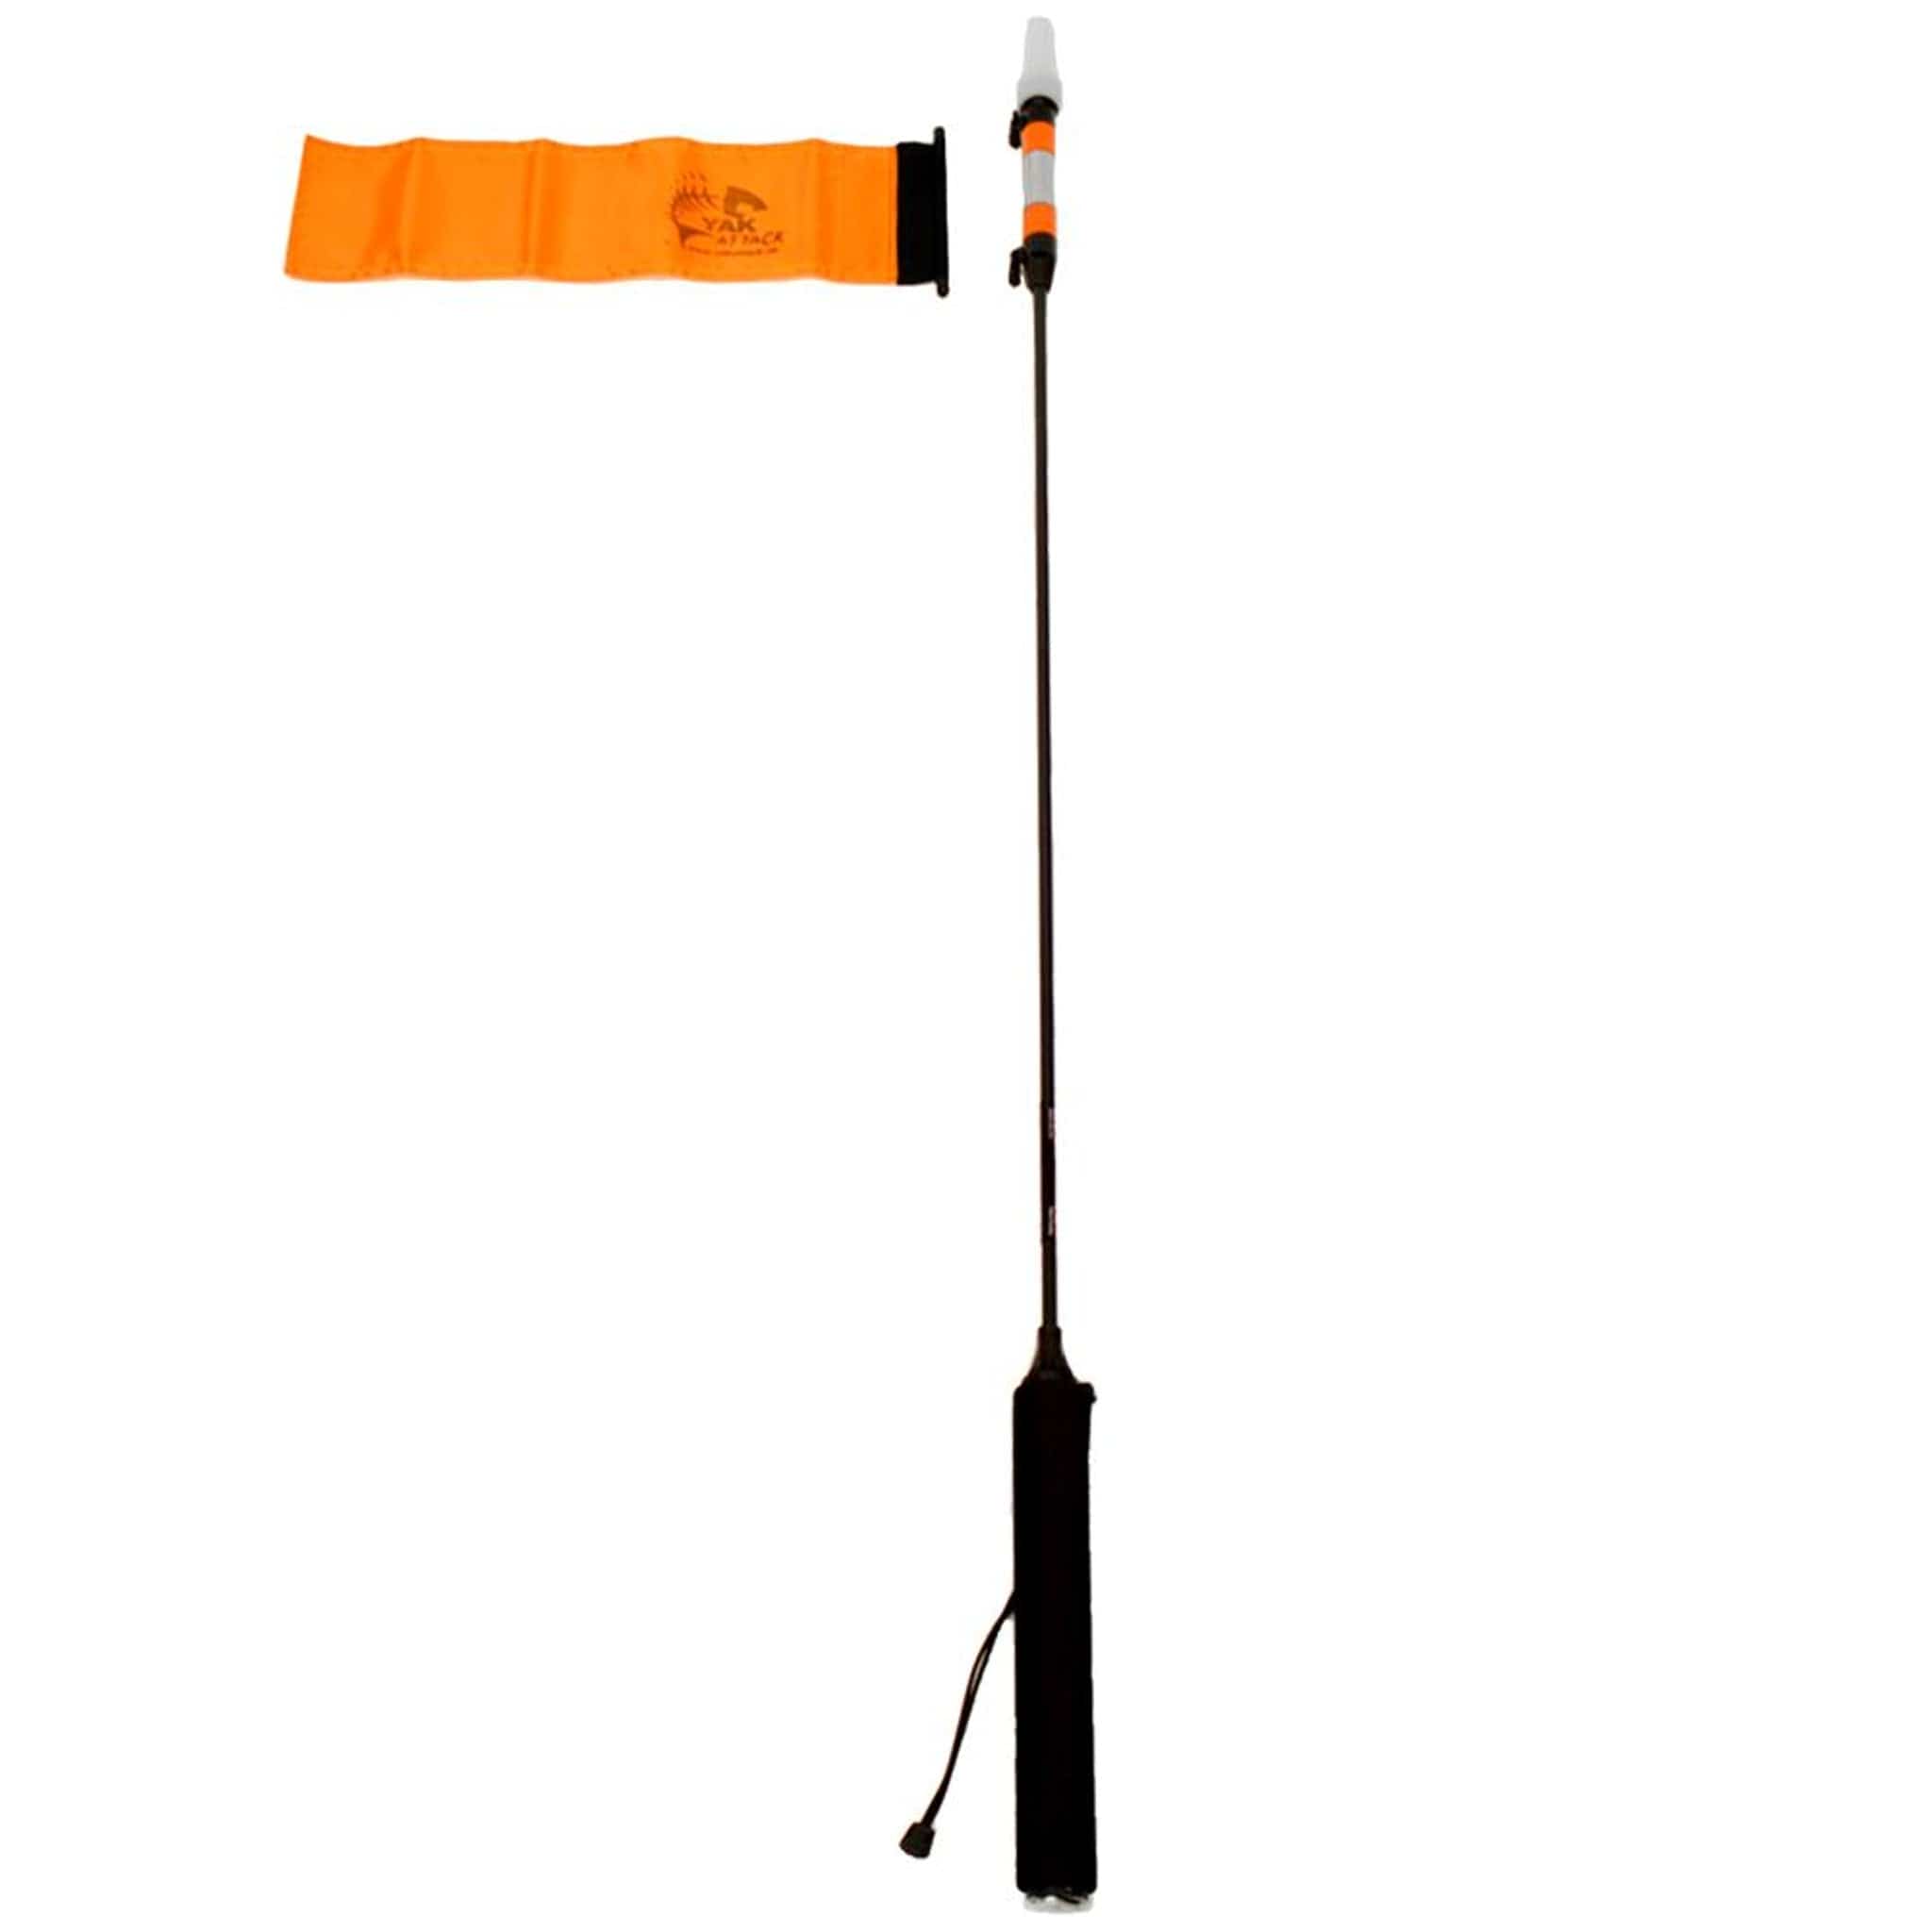 visipole-ii-geartrac-ready-includes-flag-v2fm-fpg__19247.jpg